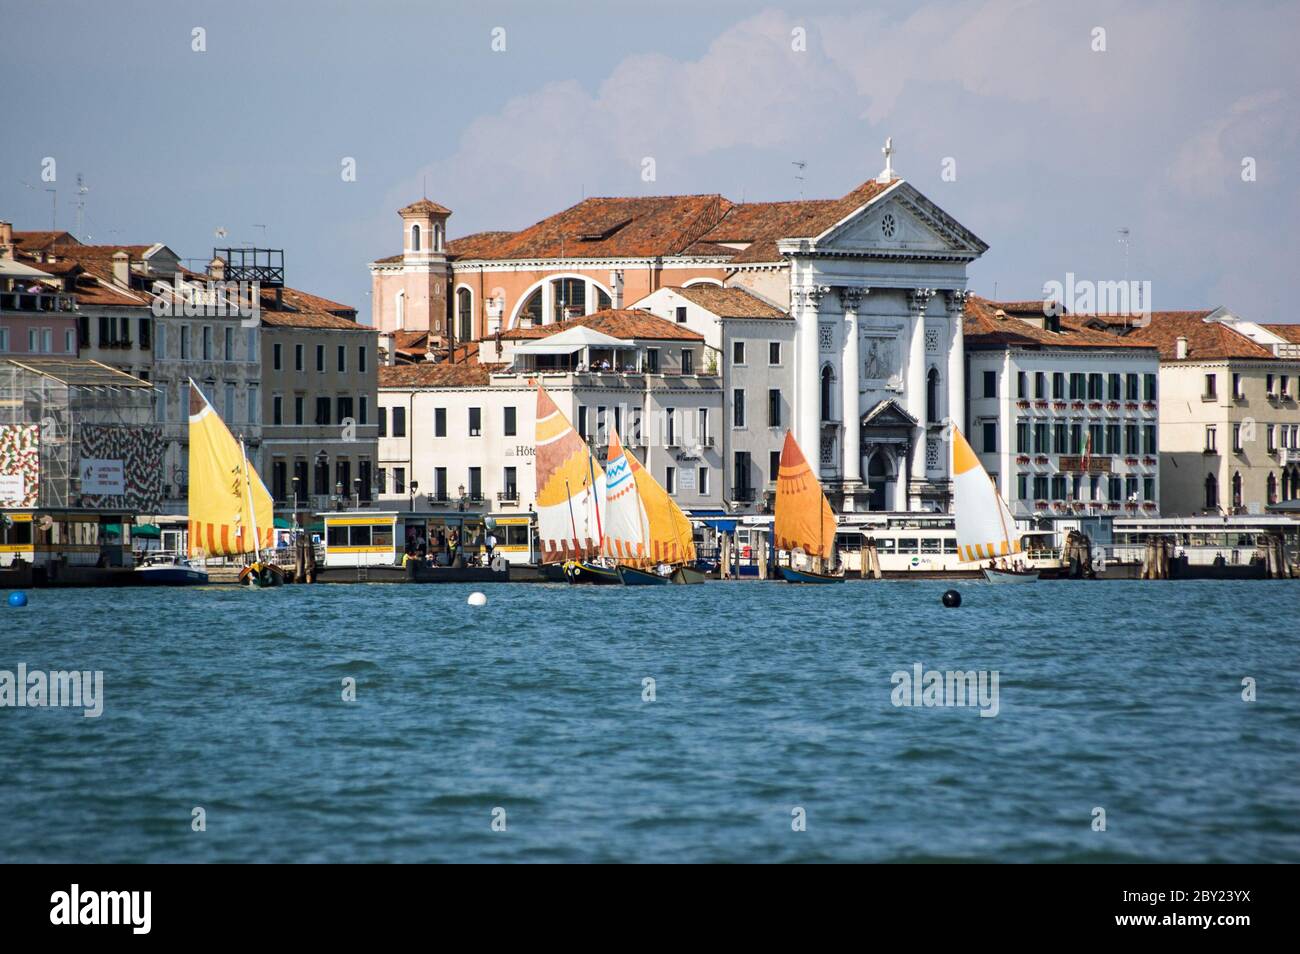 Venice, Italy - June 12, 2011:  Teams from Italy's four historic maritime republics compete in their annual regatta. Stock Photo